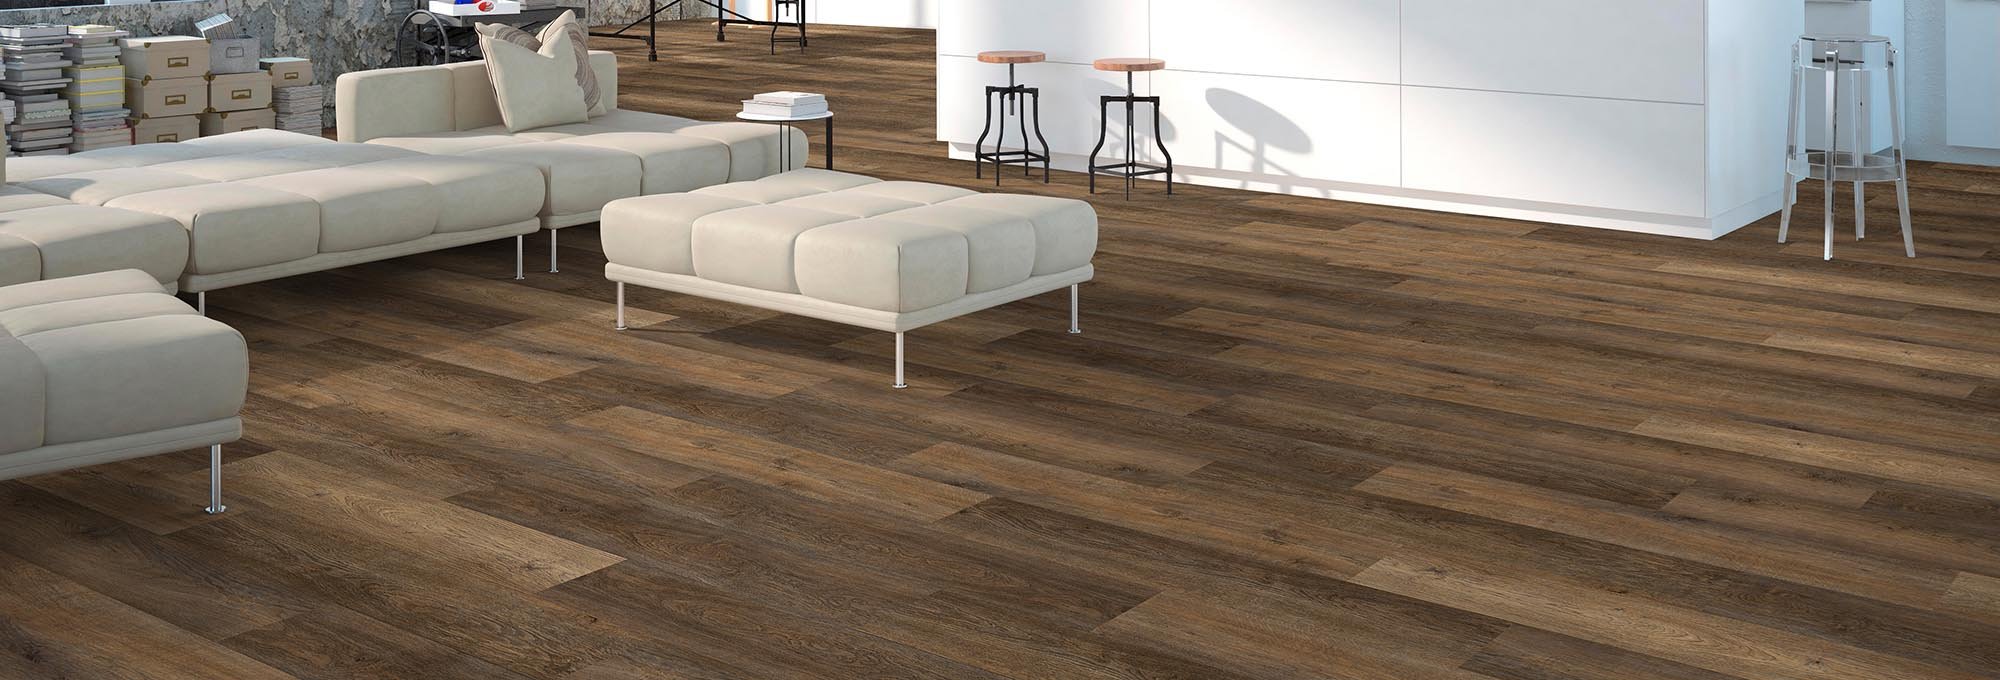 Shop Flooring Products from Carpet Warehouse and COLORTILE in Coeur d'Alene, Idaho